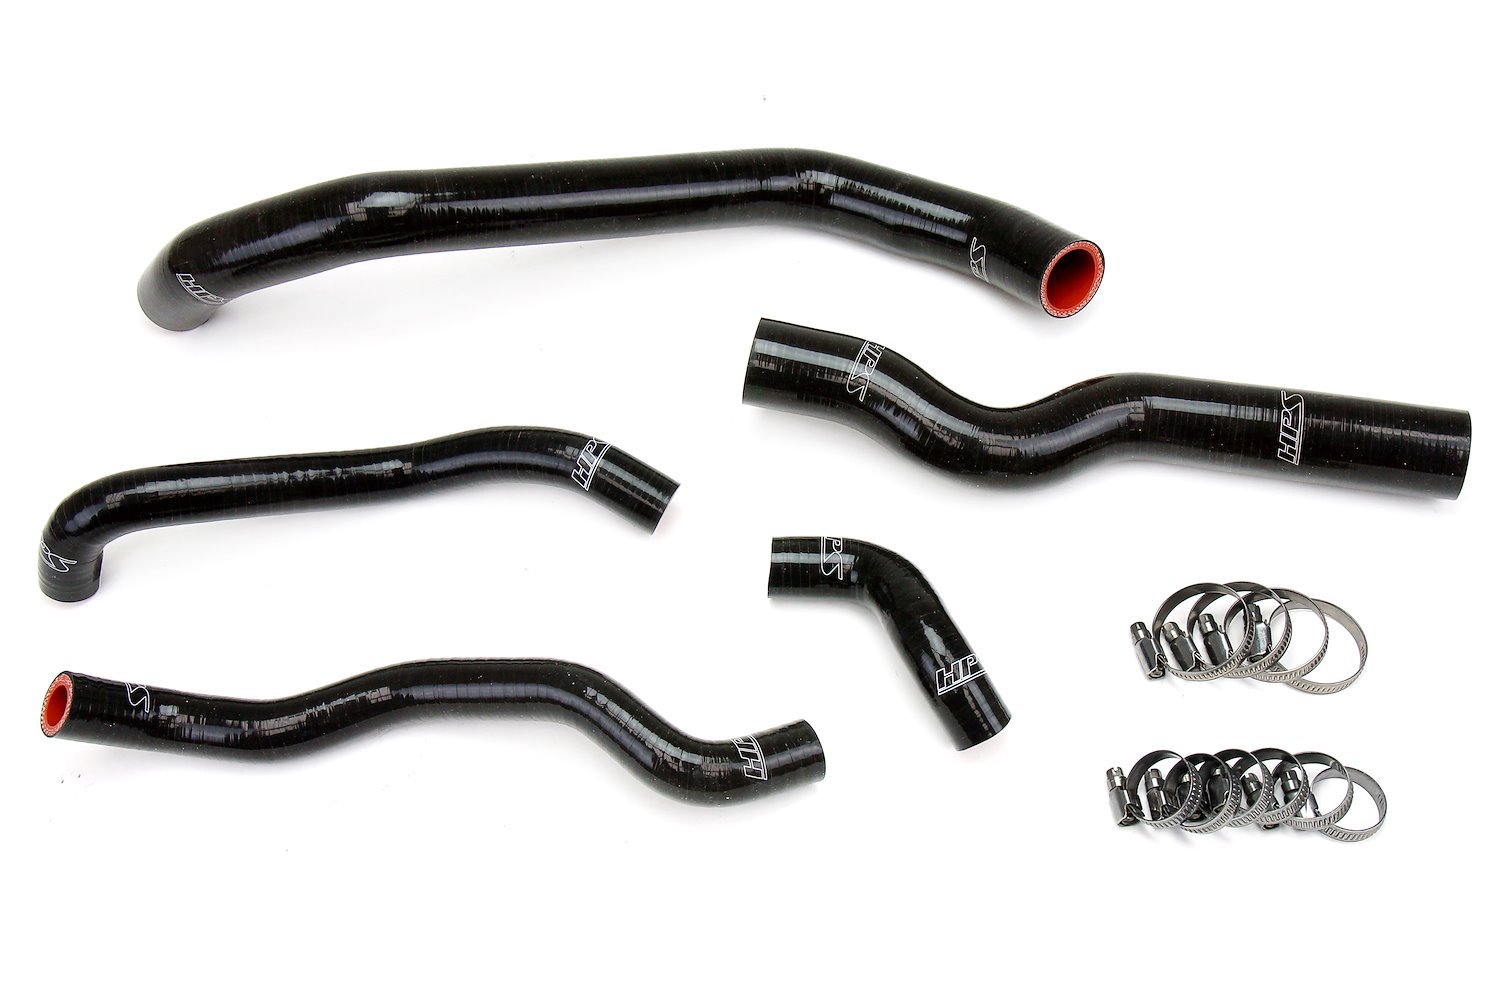 57-1973-BLK Radiator and Heater Hose Kit, 3-Ply Reinforced Silicone, Replaces Rubber Radiator & Heater Coolant Hoses